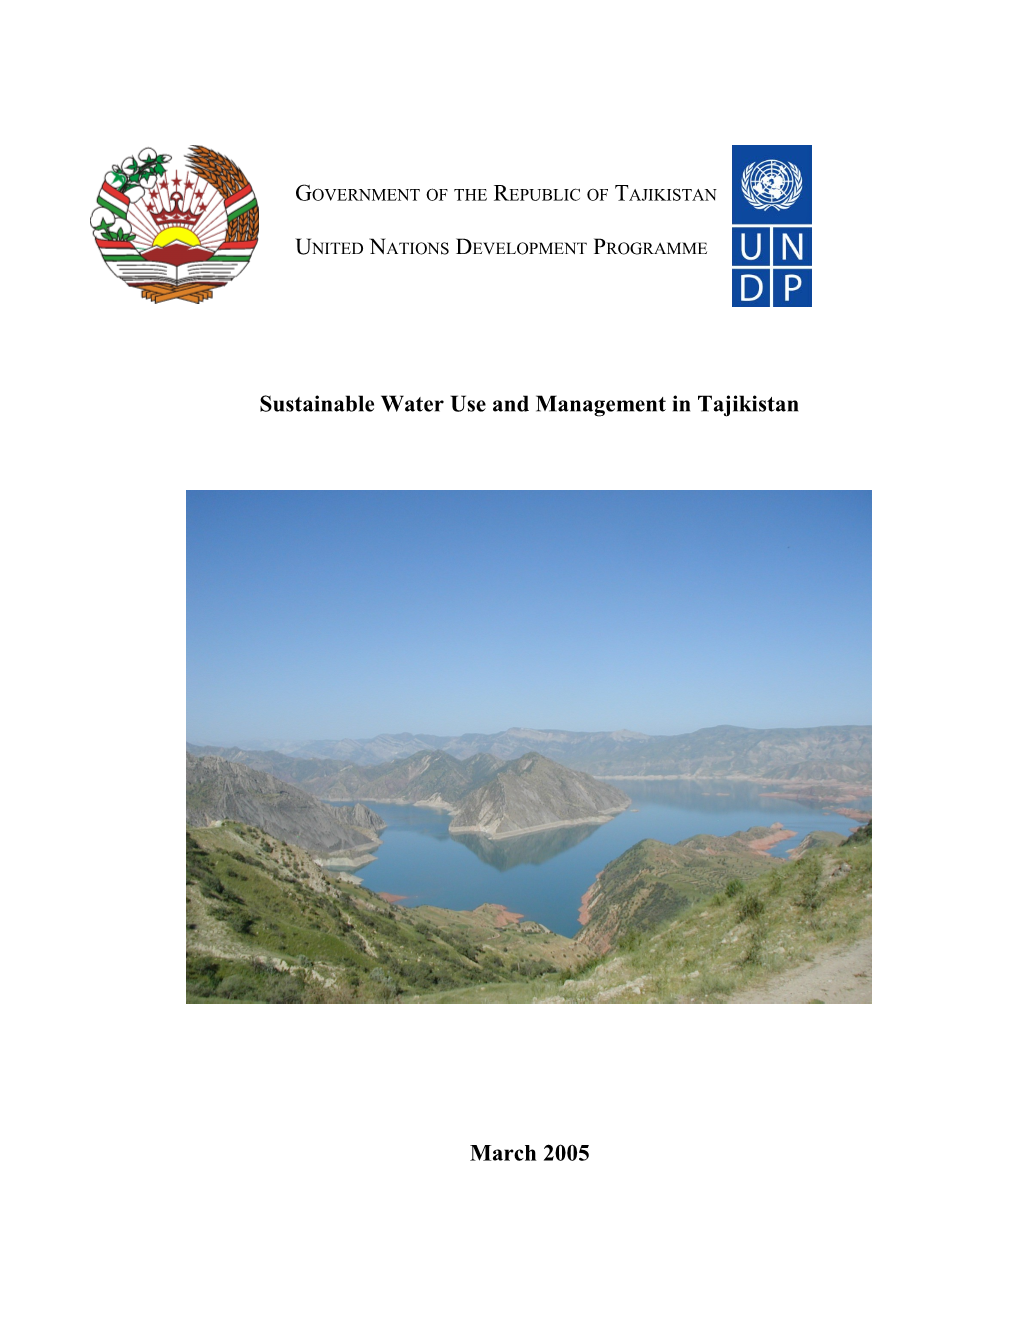 Improving the Capacity of Transboundary River Management